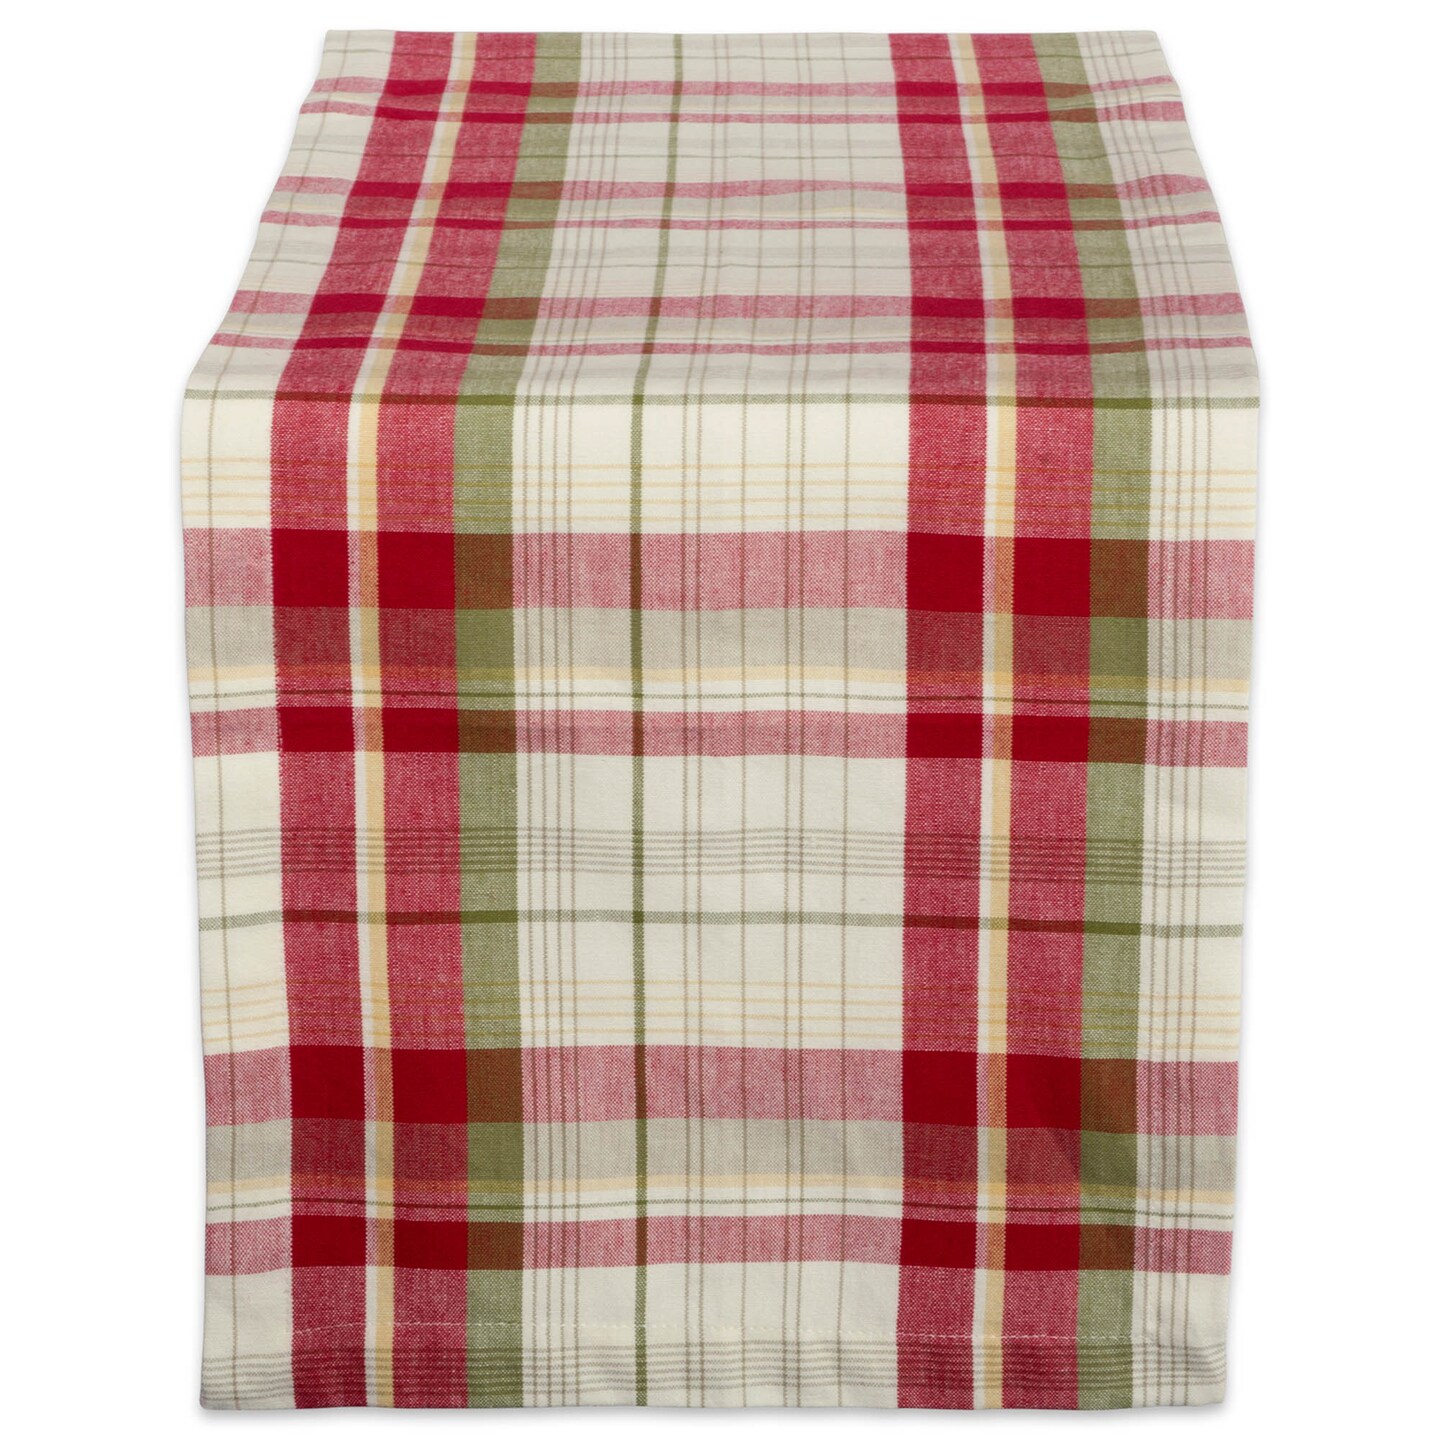 DII Orchard Plaid Table Runner